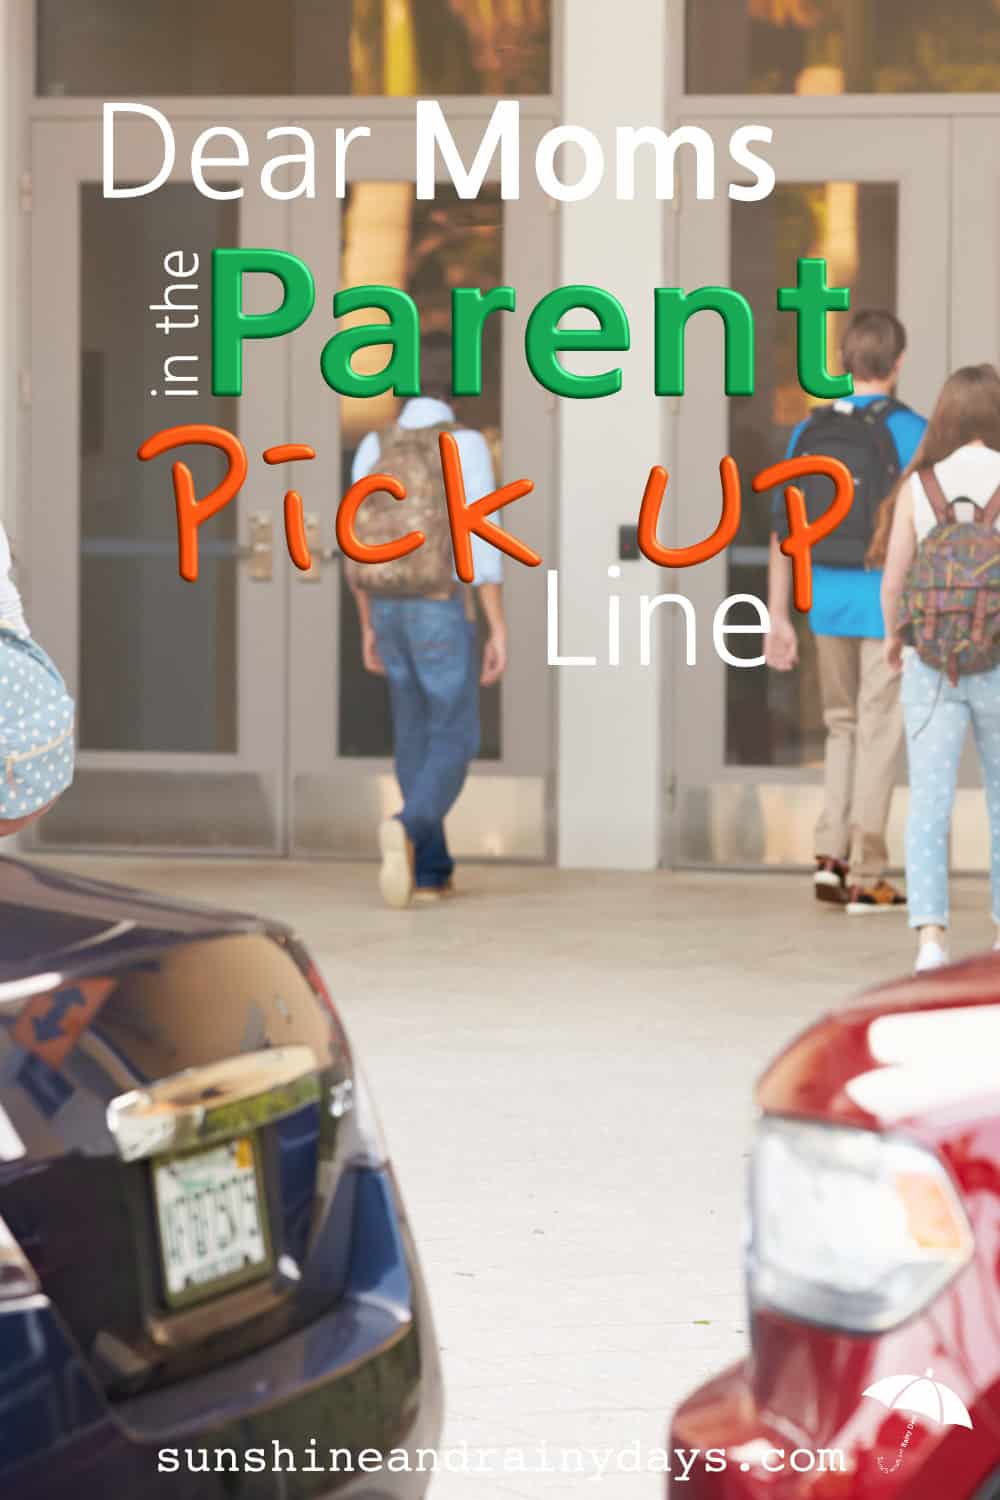 Dear Moms in the parent pick up line, if you stumble upon this letter, I have a few awesome suggestions for you! Go to a coffee shop, realize your teenagers are pretty capable of finding you, park your car, or PULL FORWARD!